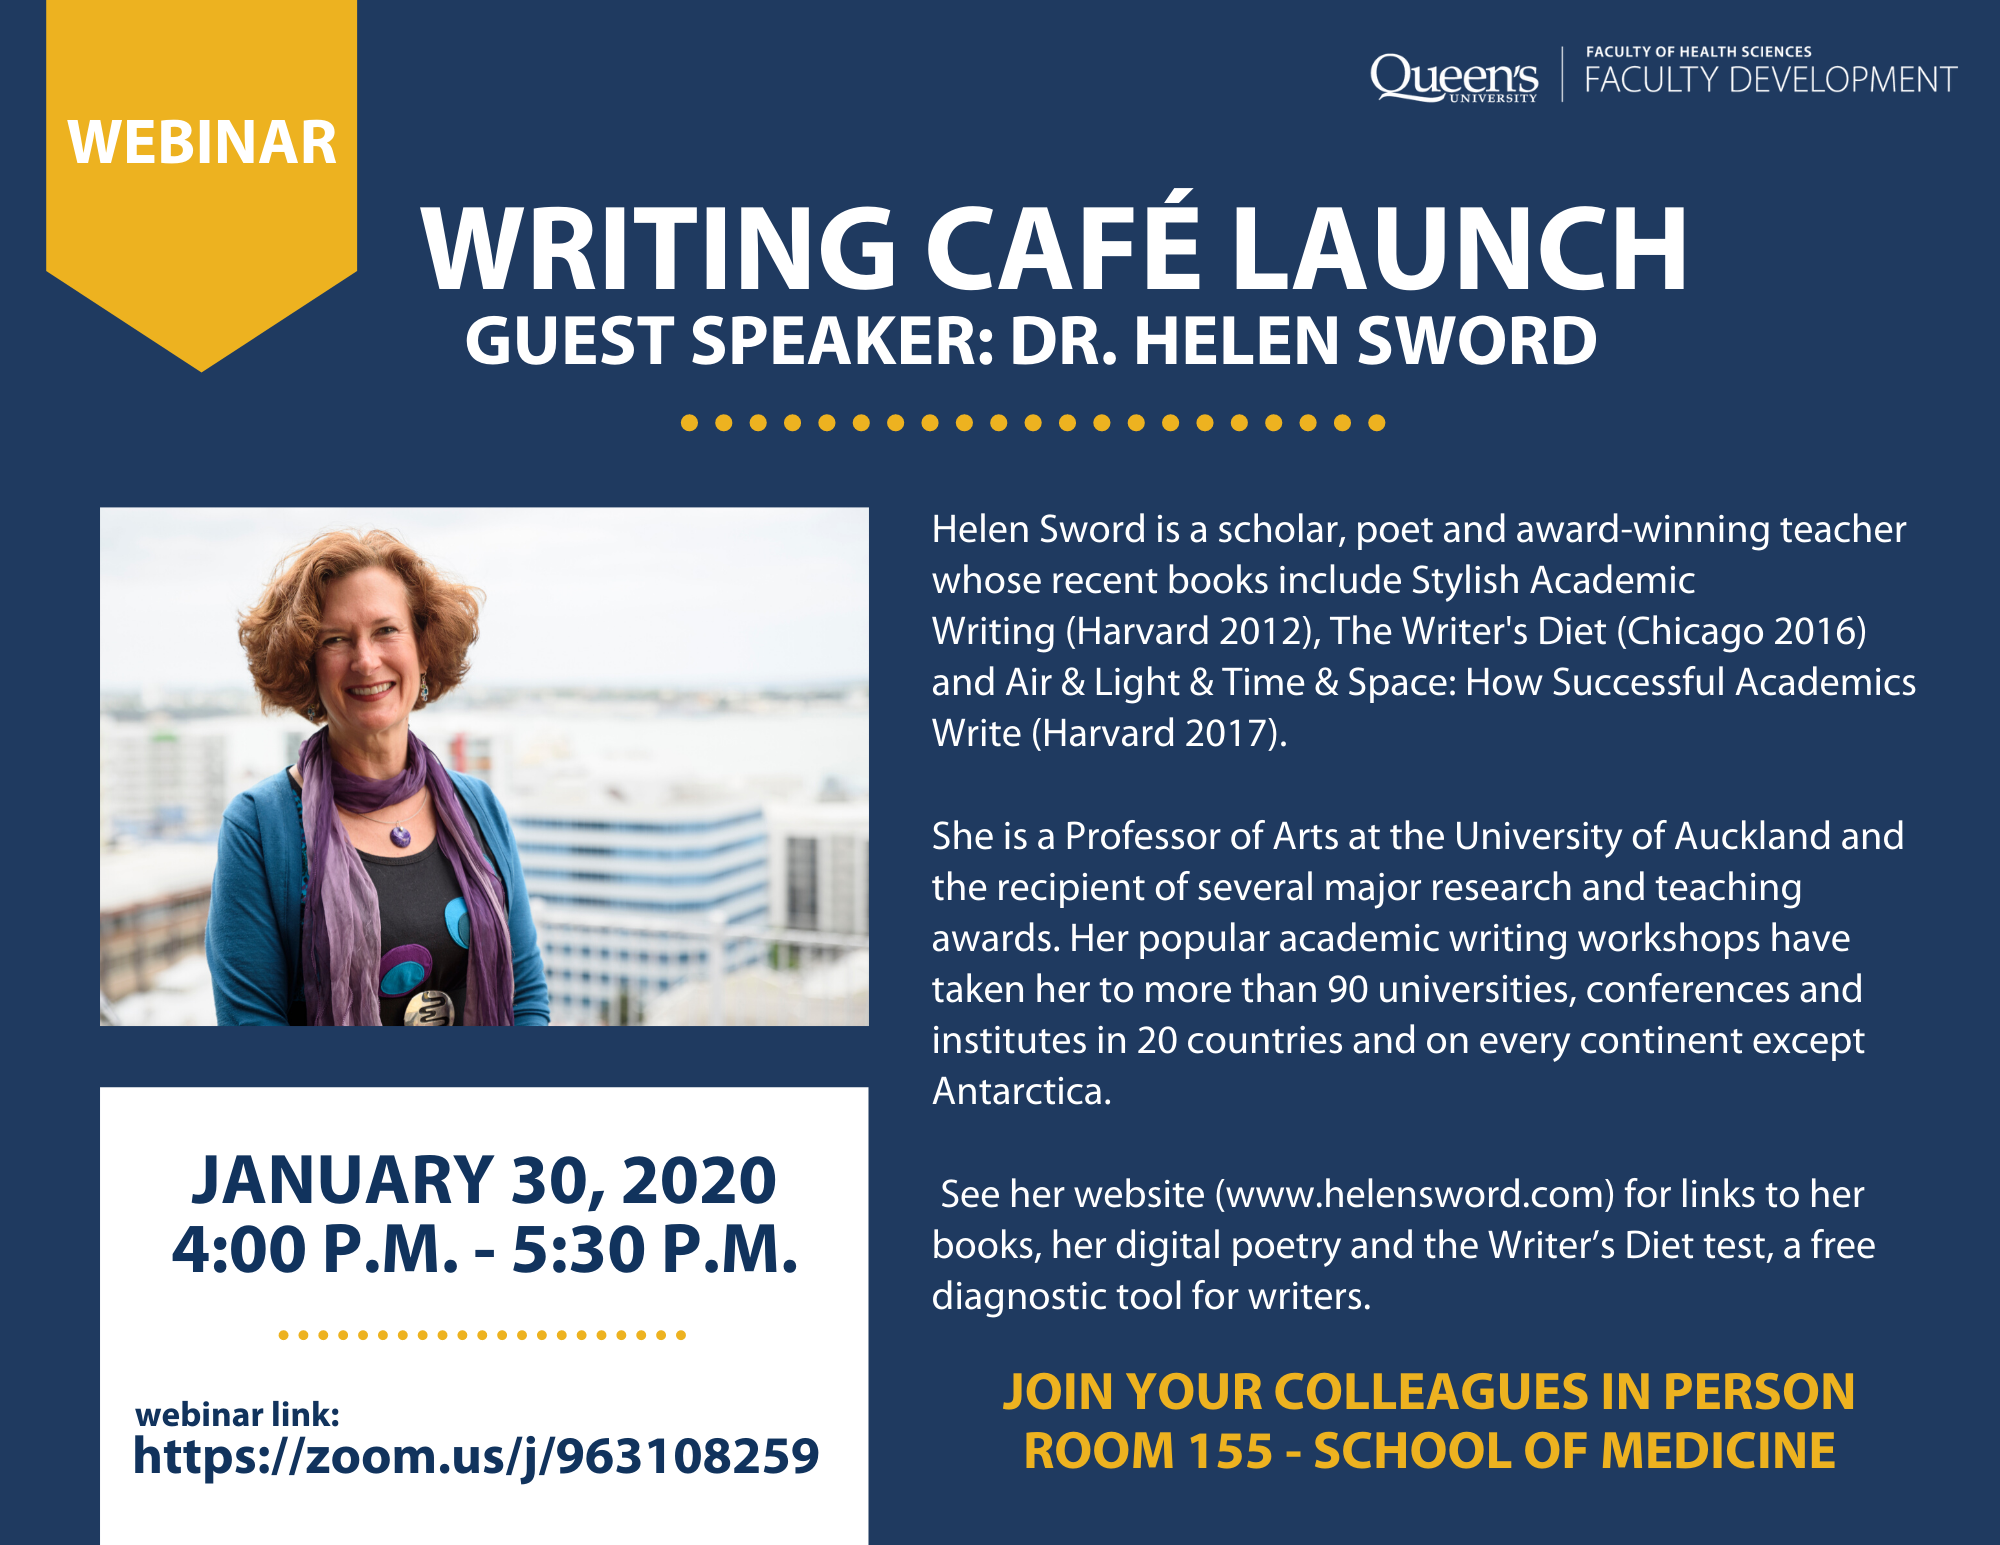 Helen Sword is a scholar, poet and award-winning teacher whose recent books include Stylish Academic Writing (Harvard 2012), The Writer's Diet (Chicago 2016) and Air & Light & Time & Space: How Successful Academics Write (Harvard 2017).   She is a Professor of Arts at the University of Auckland and the recipient of several major research and teaching awards. Her popular academic writing workshops have taken her to more than 90 universities, conferences and institutes in 20 countries and on every continent except Antarctica.   See her website (www.helensword.com) for links to her books, her digital poetry and the Writer’s Diet test, a free diagnostic tool for writers.